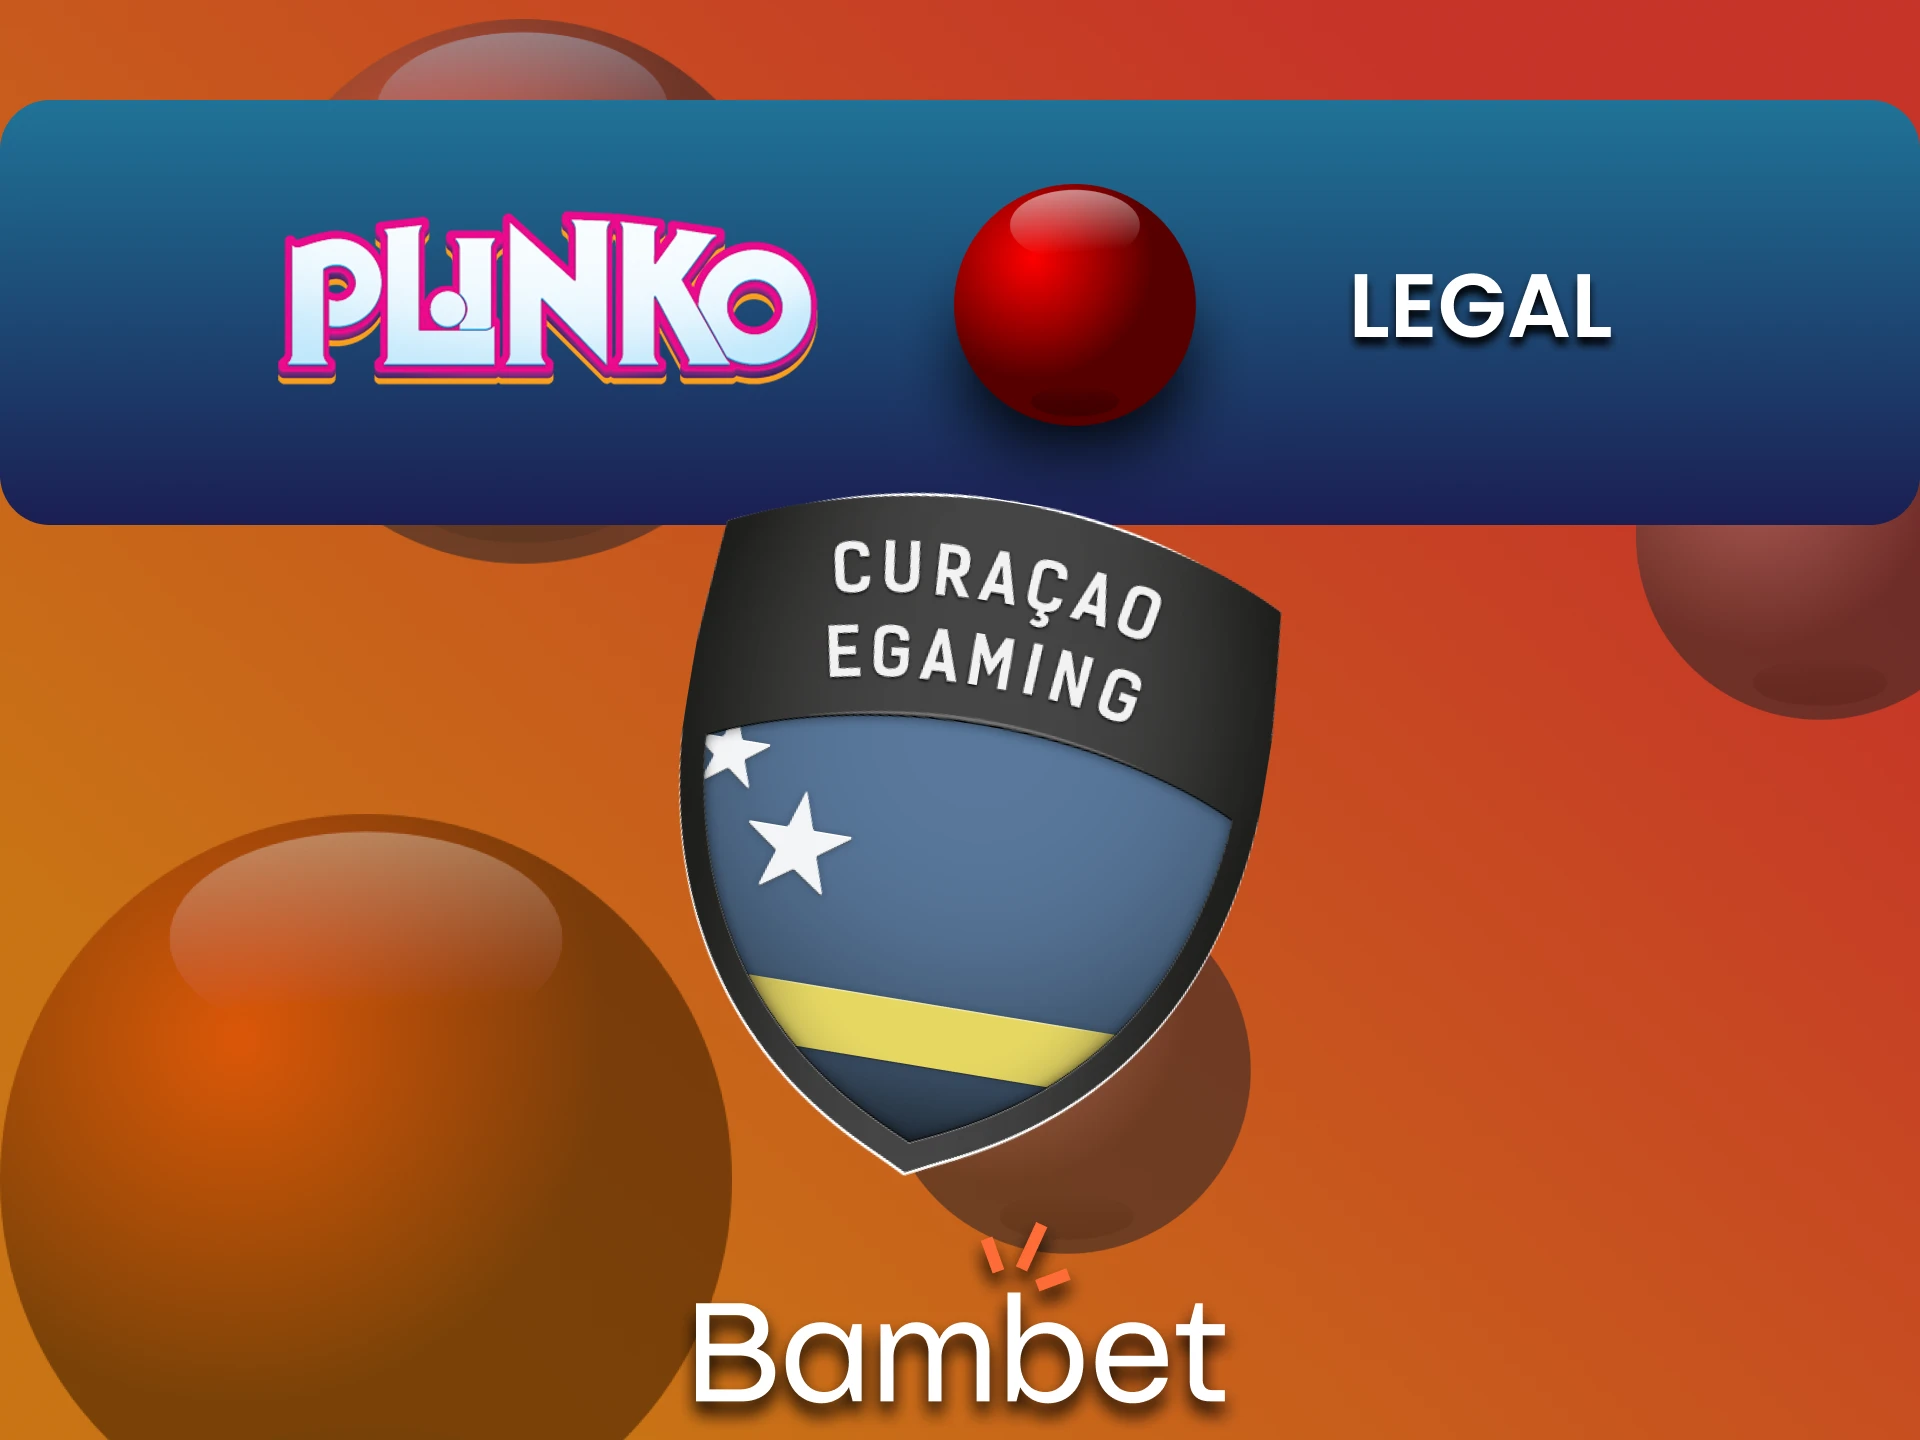 Bambet is legal for Plinko players in India.